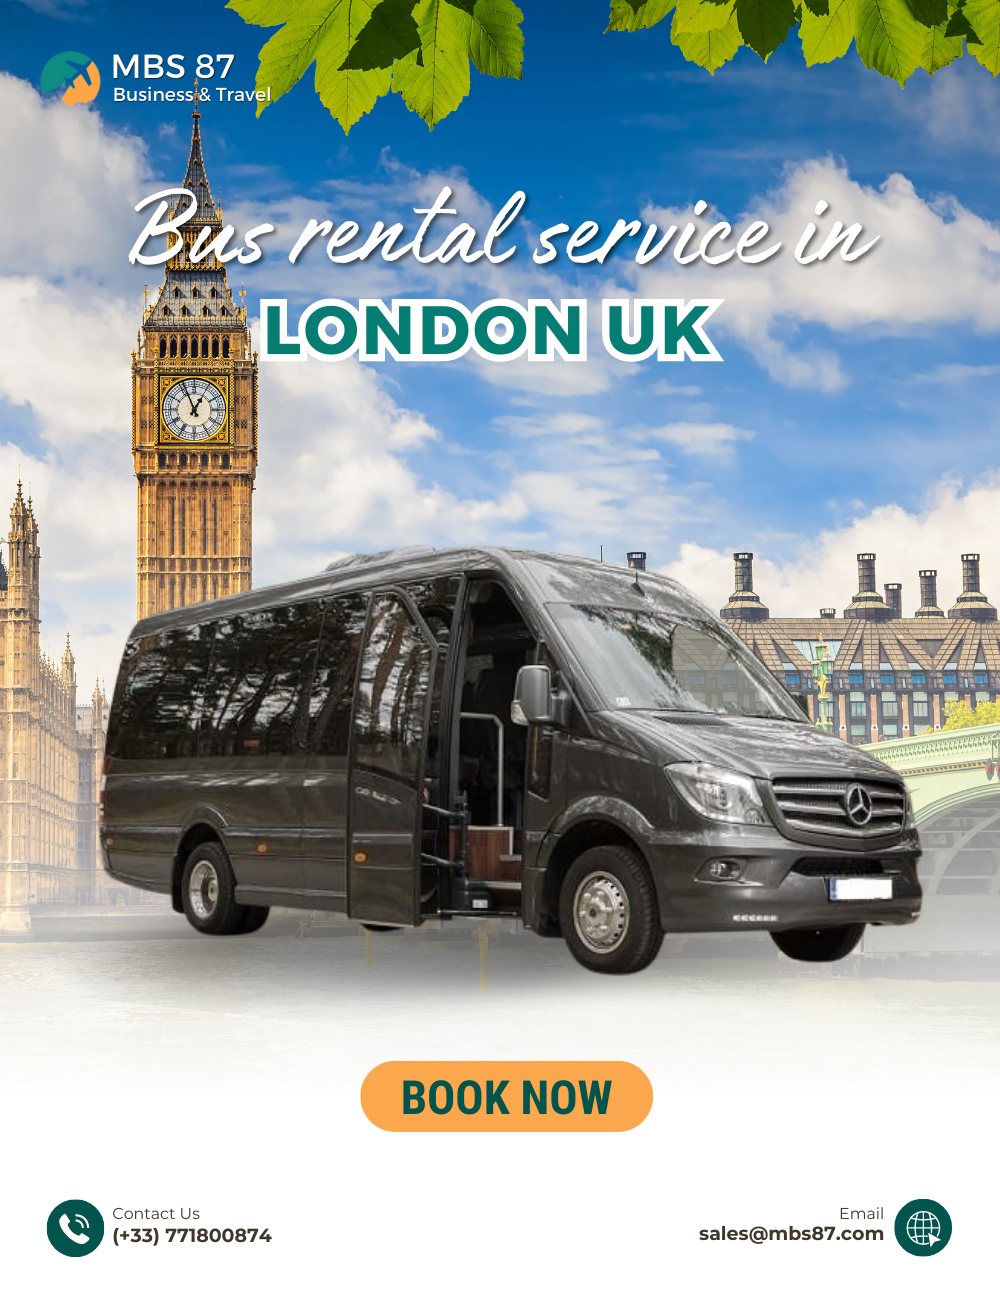 Top Benefits of Using MBS87 Store's Long Distance Bus Rental Service from London